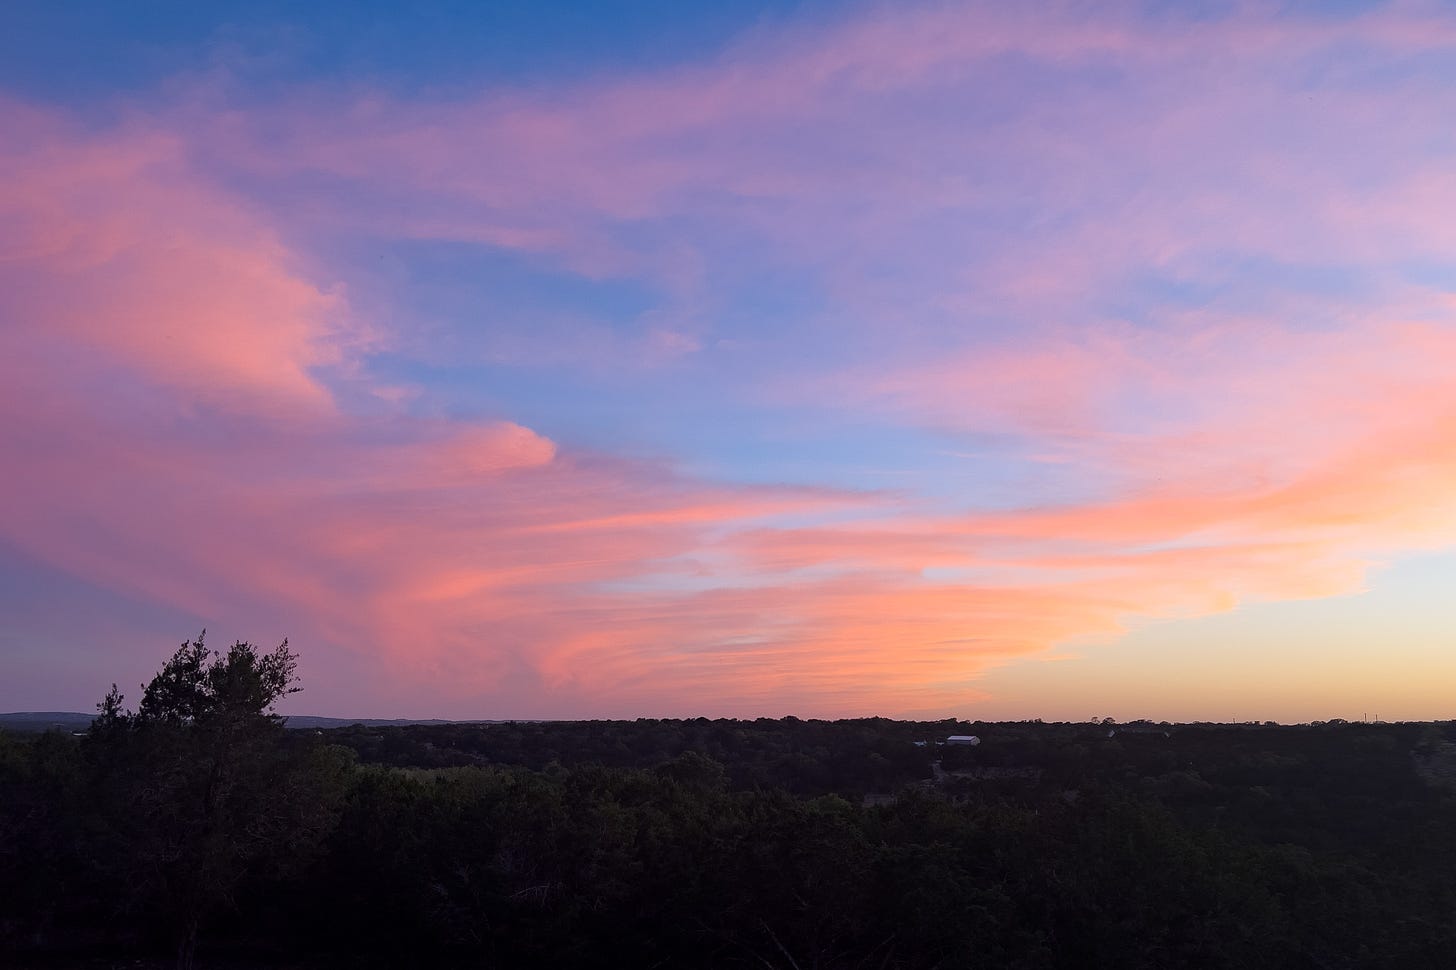 A sunset sky with varied shades of peach and pink clouds against a blue sky with darkened tree tops at the bottom of the frame